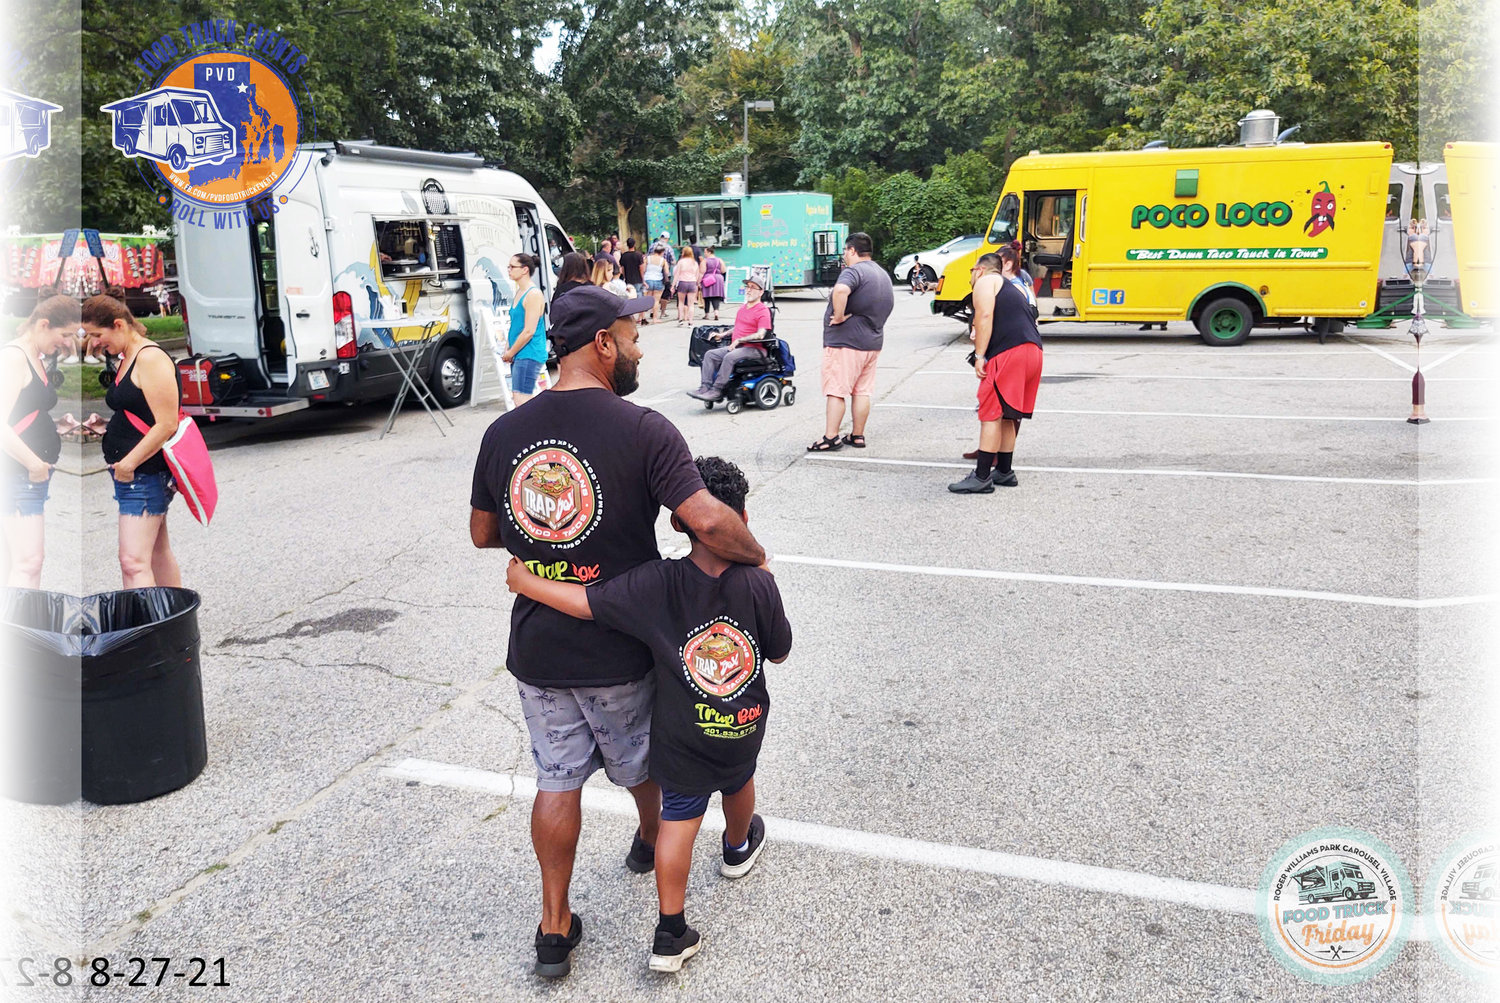 food truck friday at rwp carousel village is a fuss-free family favorite, presented by PVD Food Truck Events